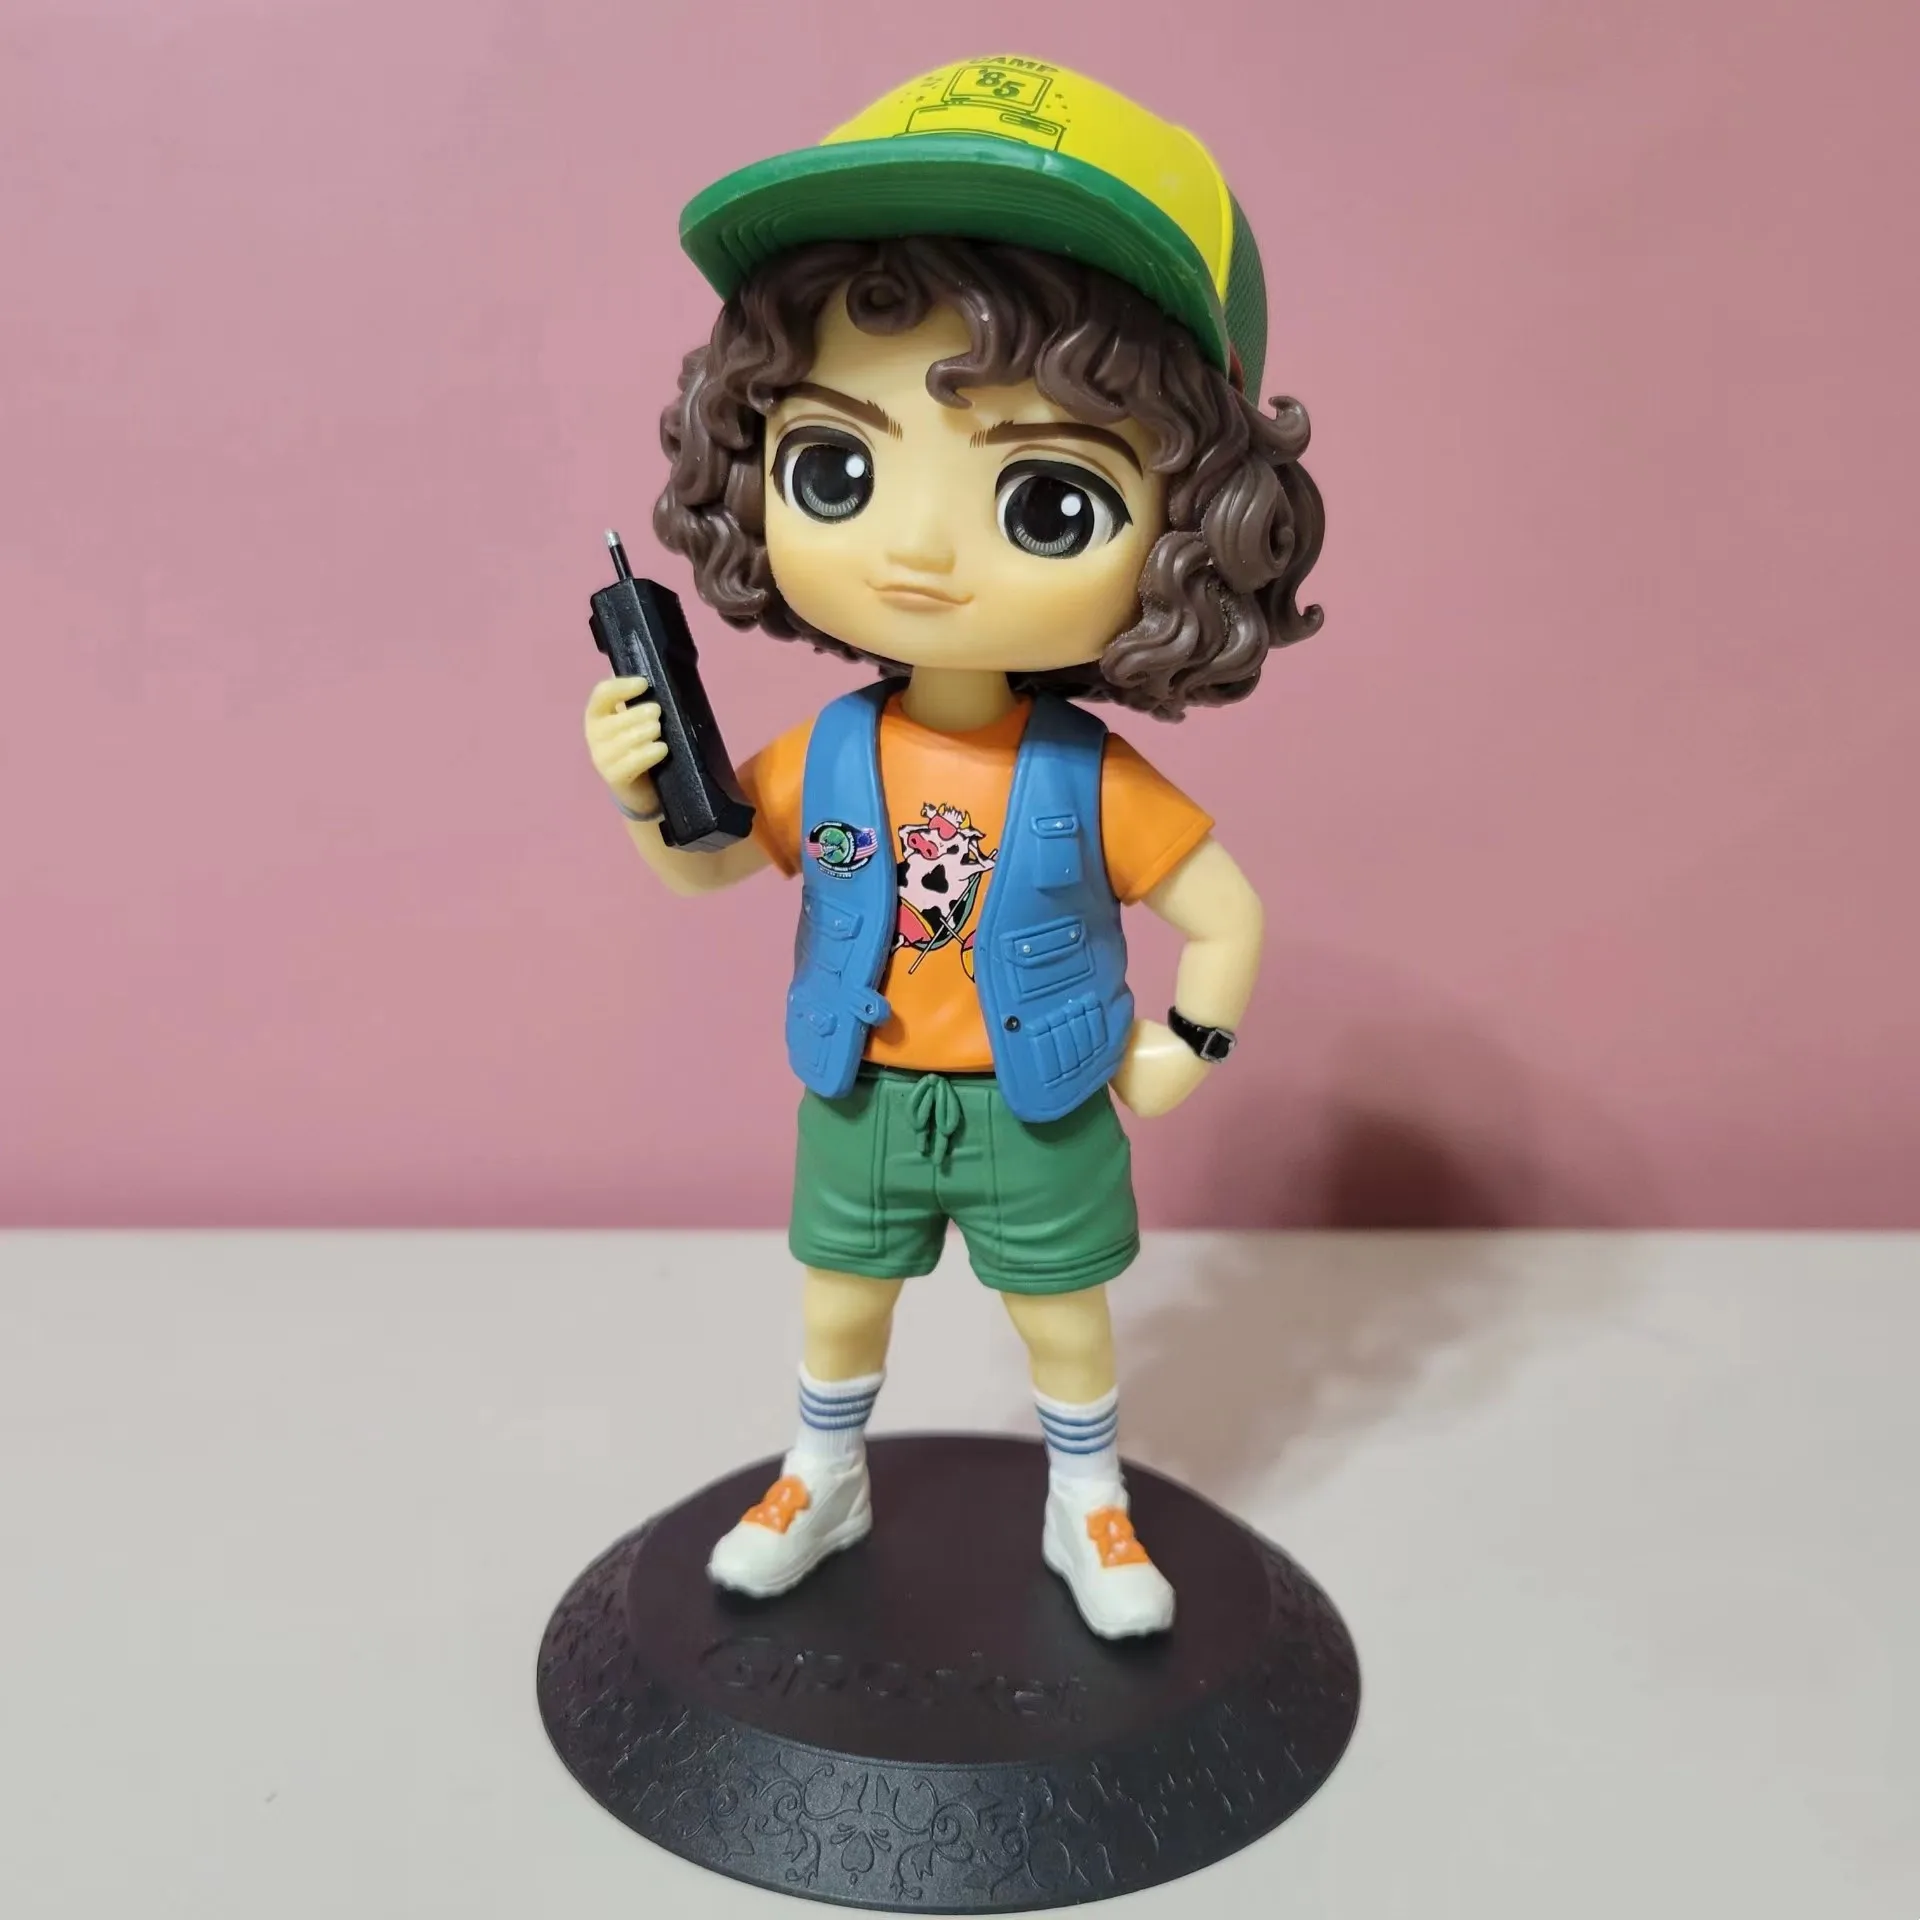 

14cm Original Stranger Things Character Dustin Action Figure Dolls Toys Collection Room Decoration Birthday Christmas Gift